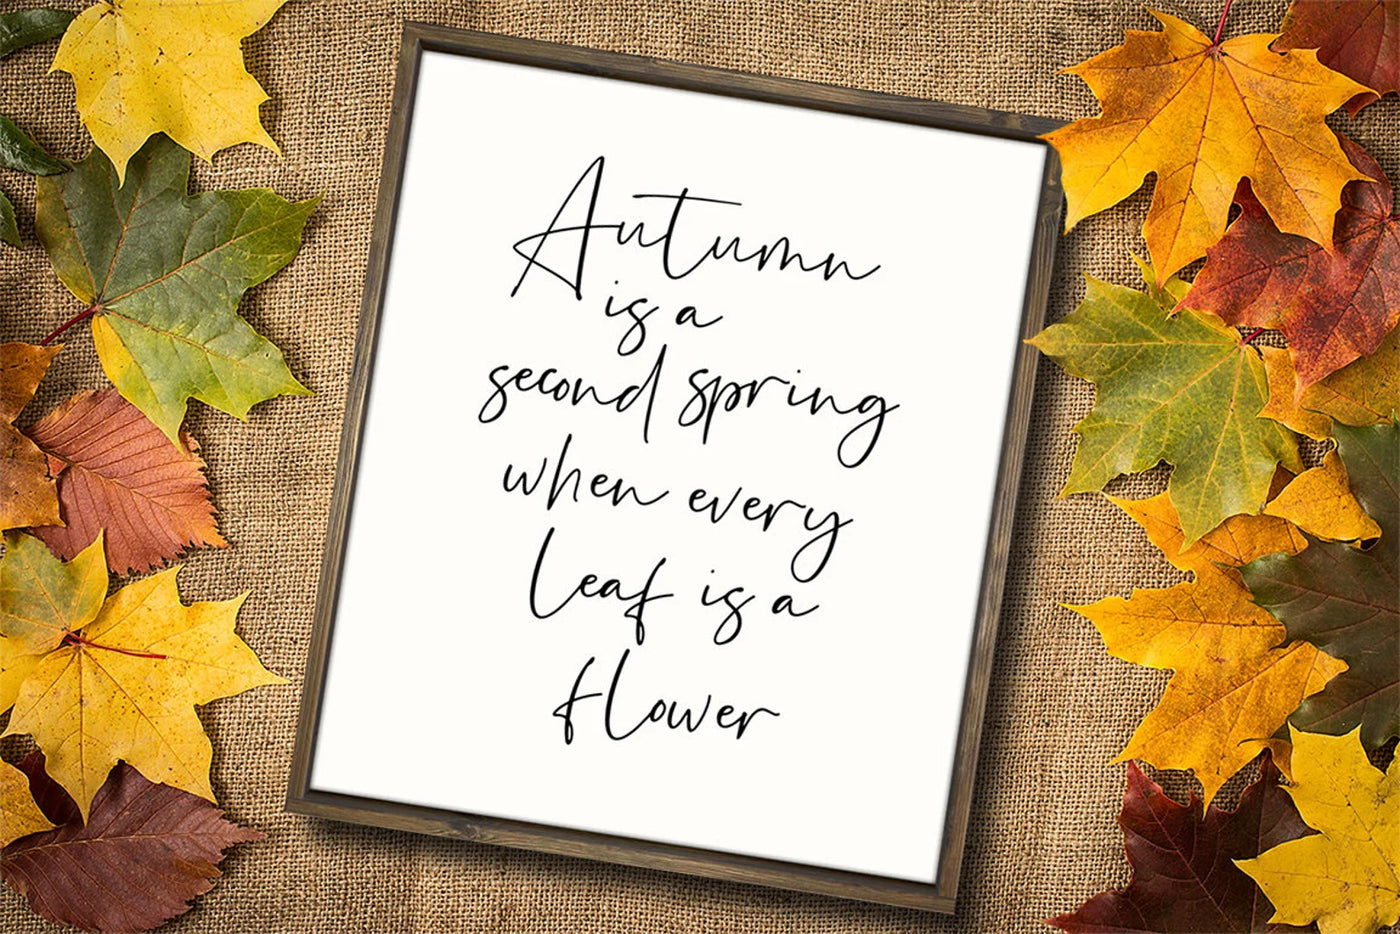 Autumn is Second Spring